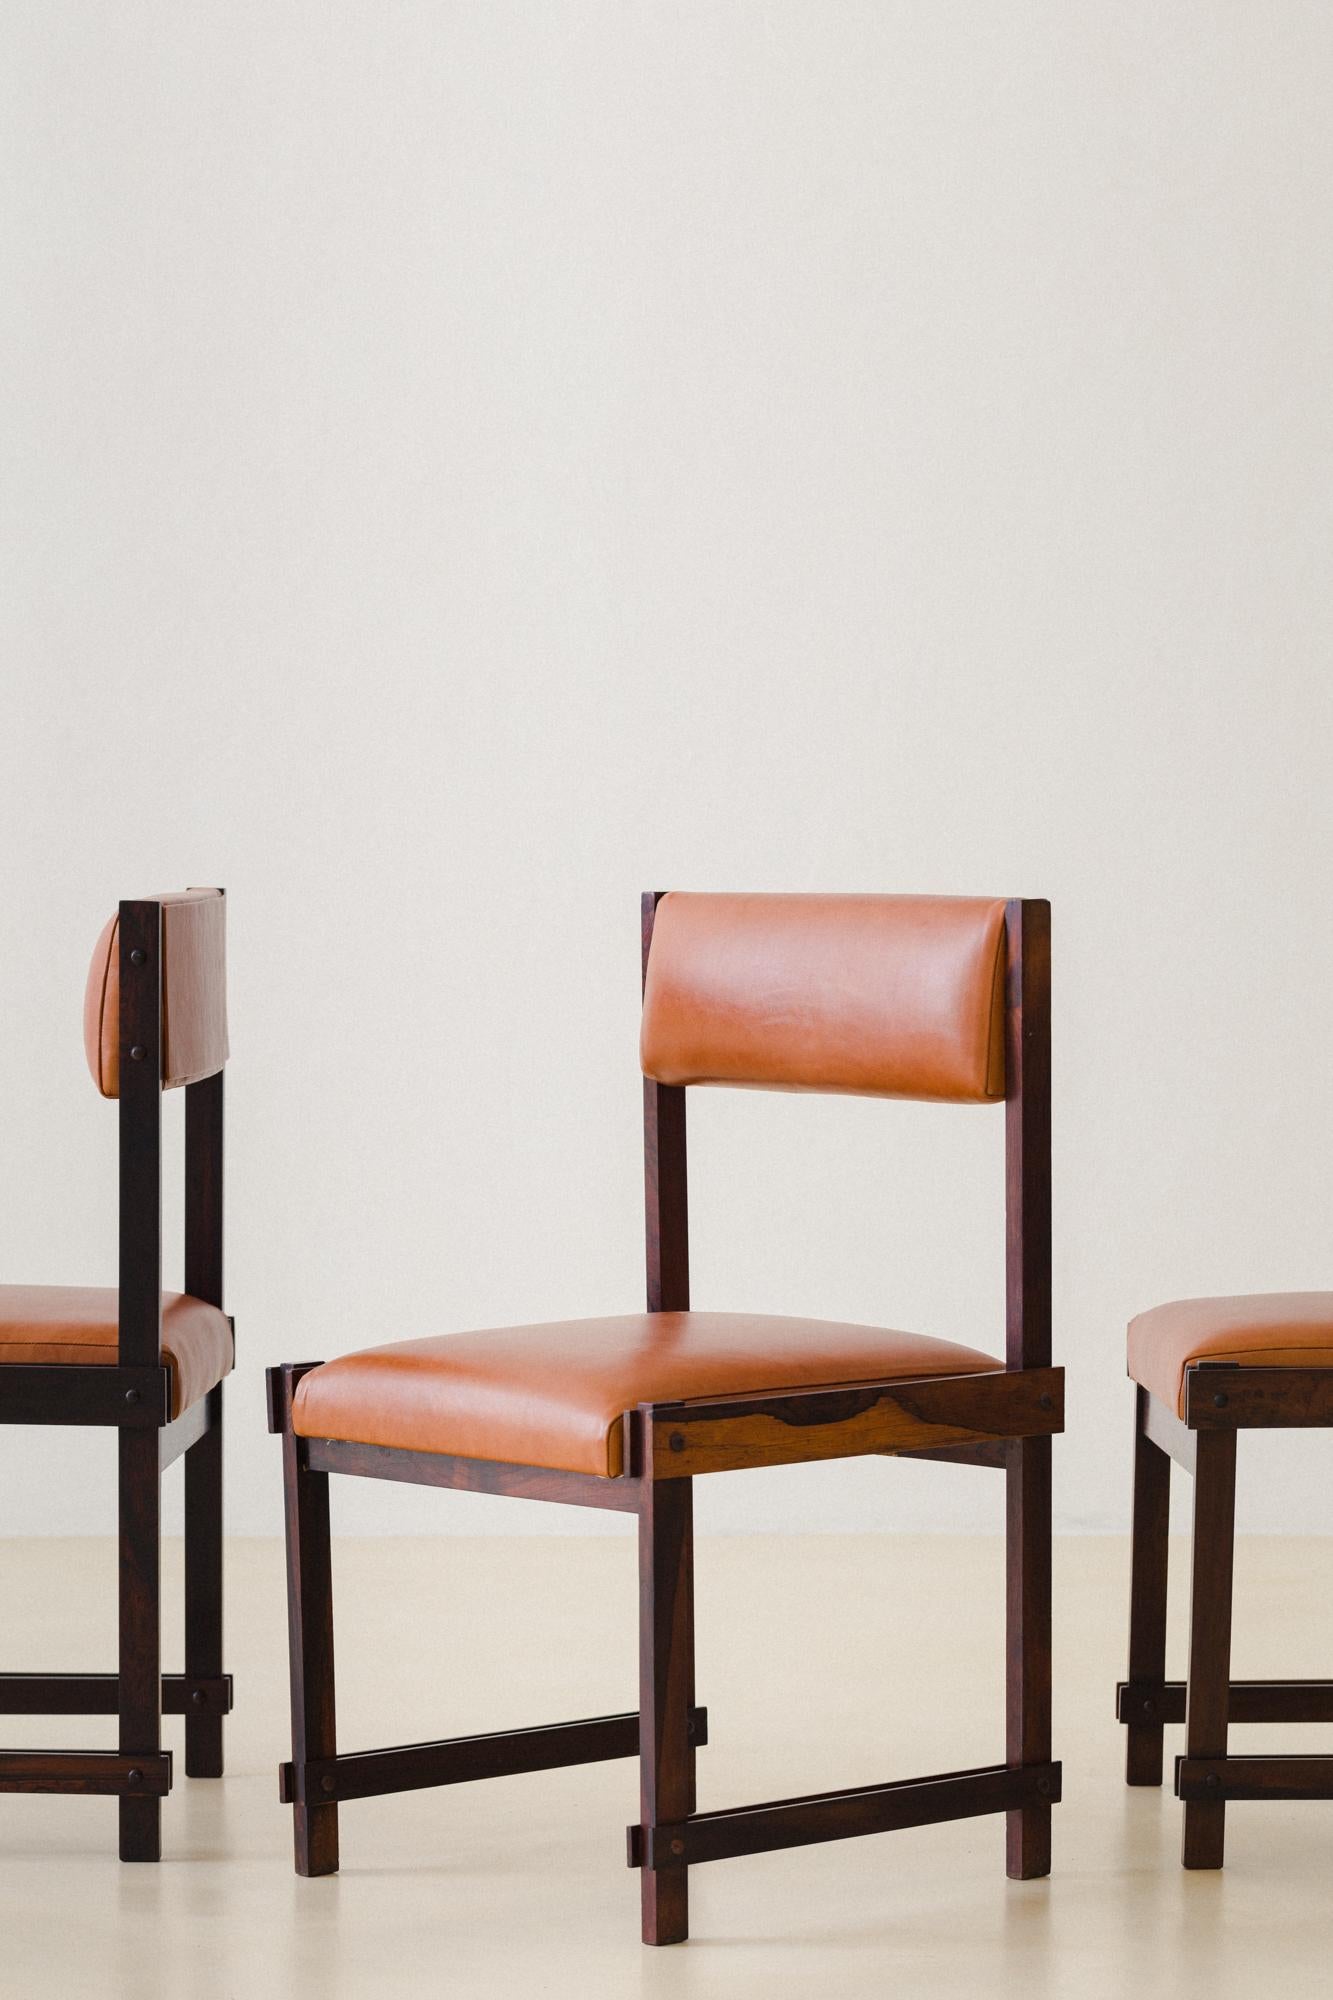 Brazilian Rosewood Dining Chairs by FAI 'Fatima Arquitetura Interiores', 1960s For Sale 6